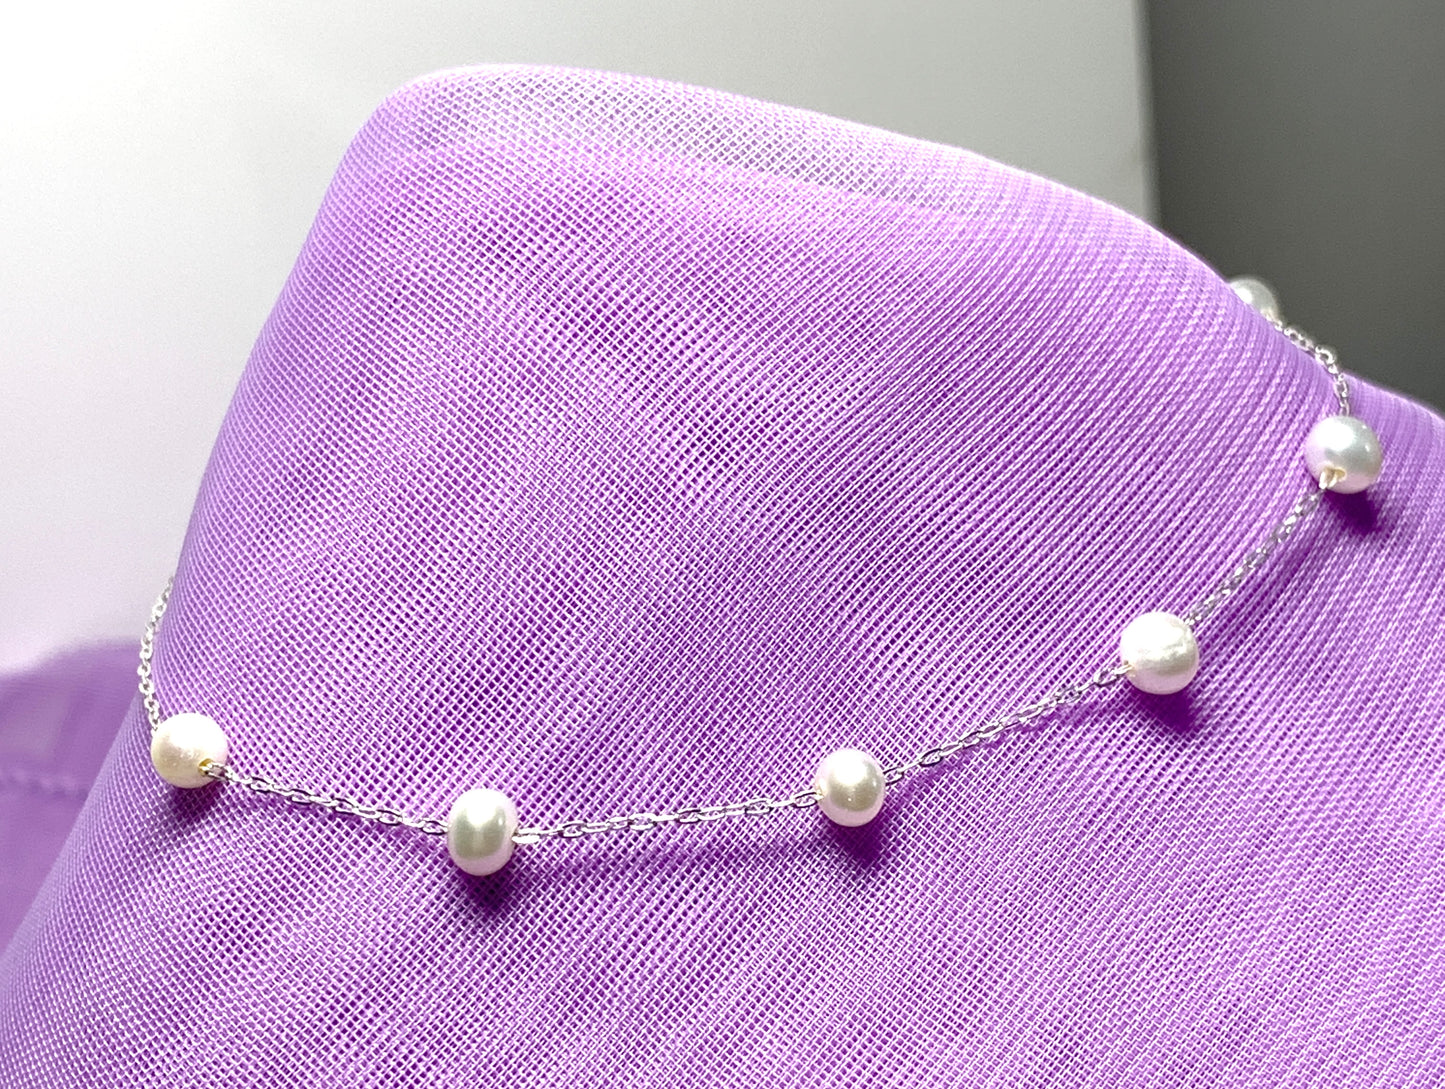 Real freshwater fine round pearl sterling silver bracelet